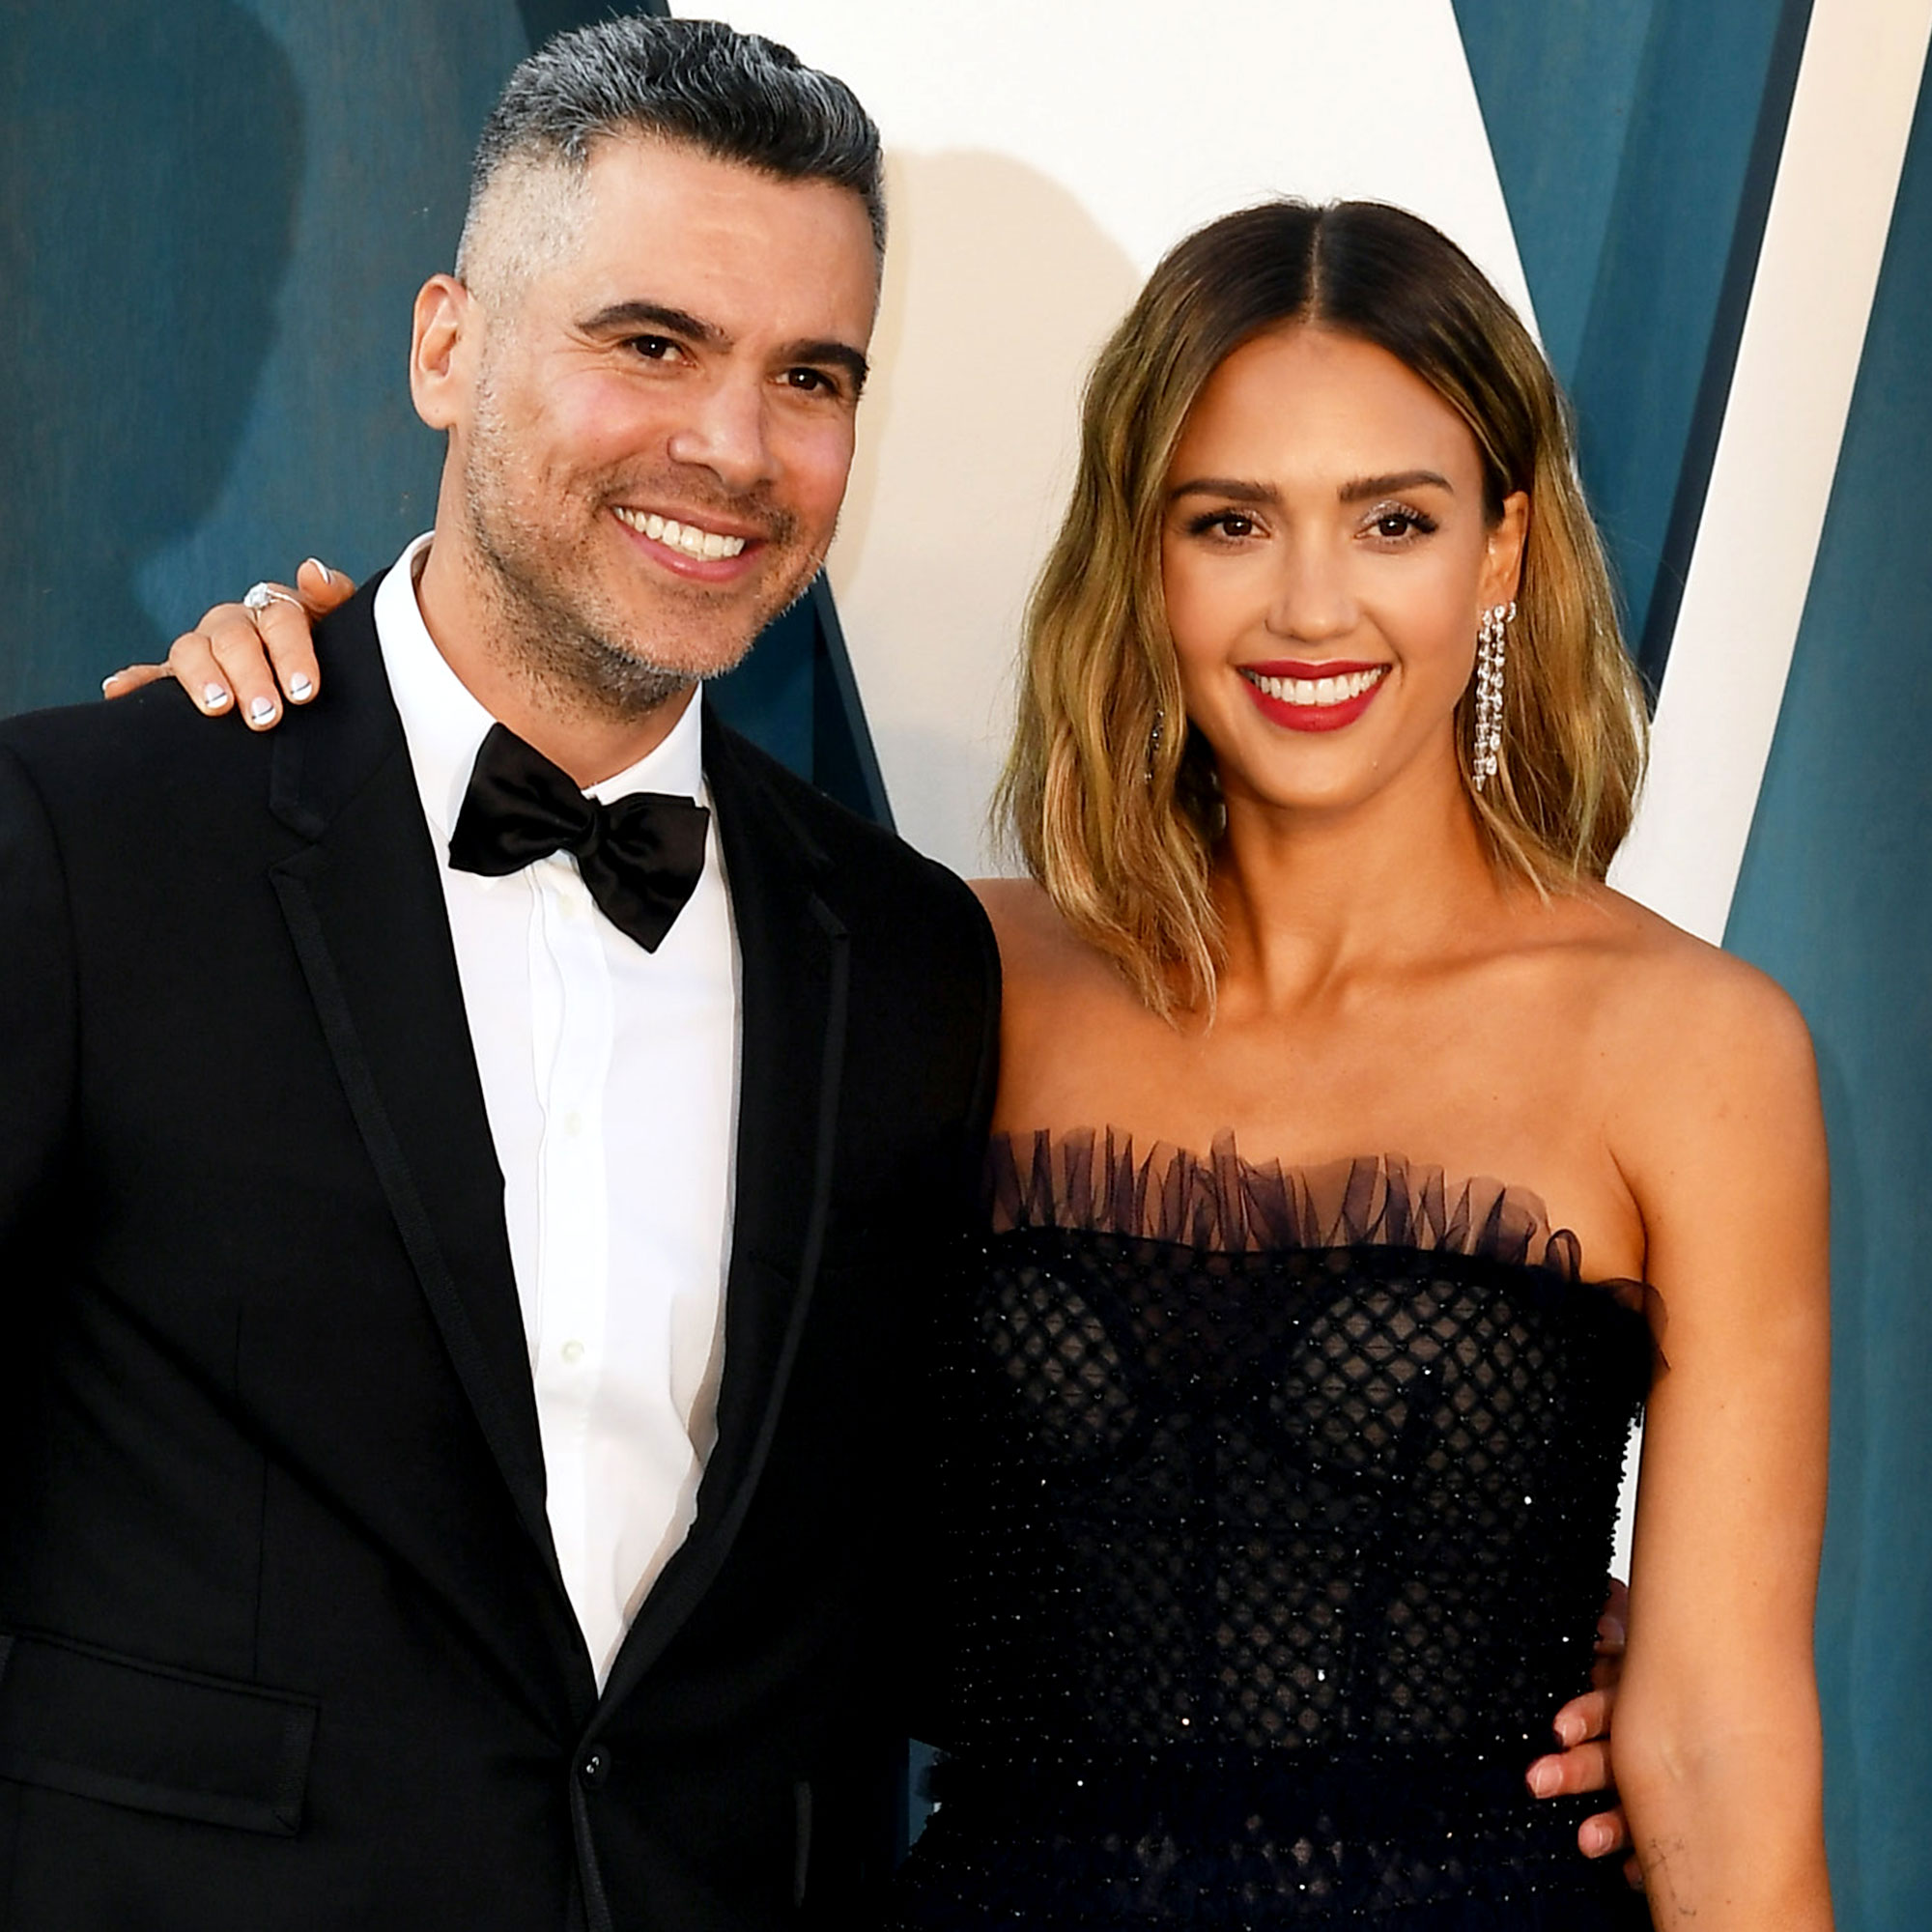 Jessica Alba - latest news, breaking stories and comment - The Independent